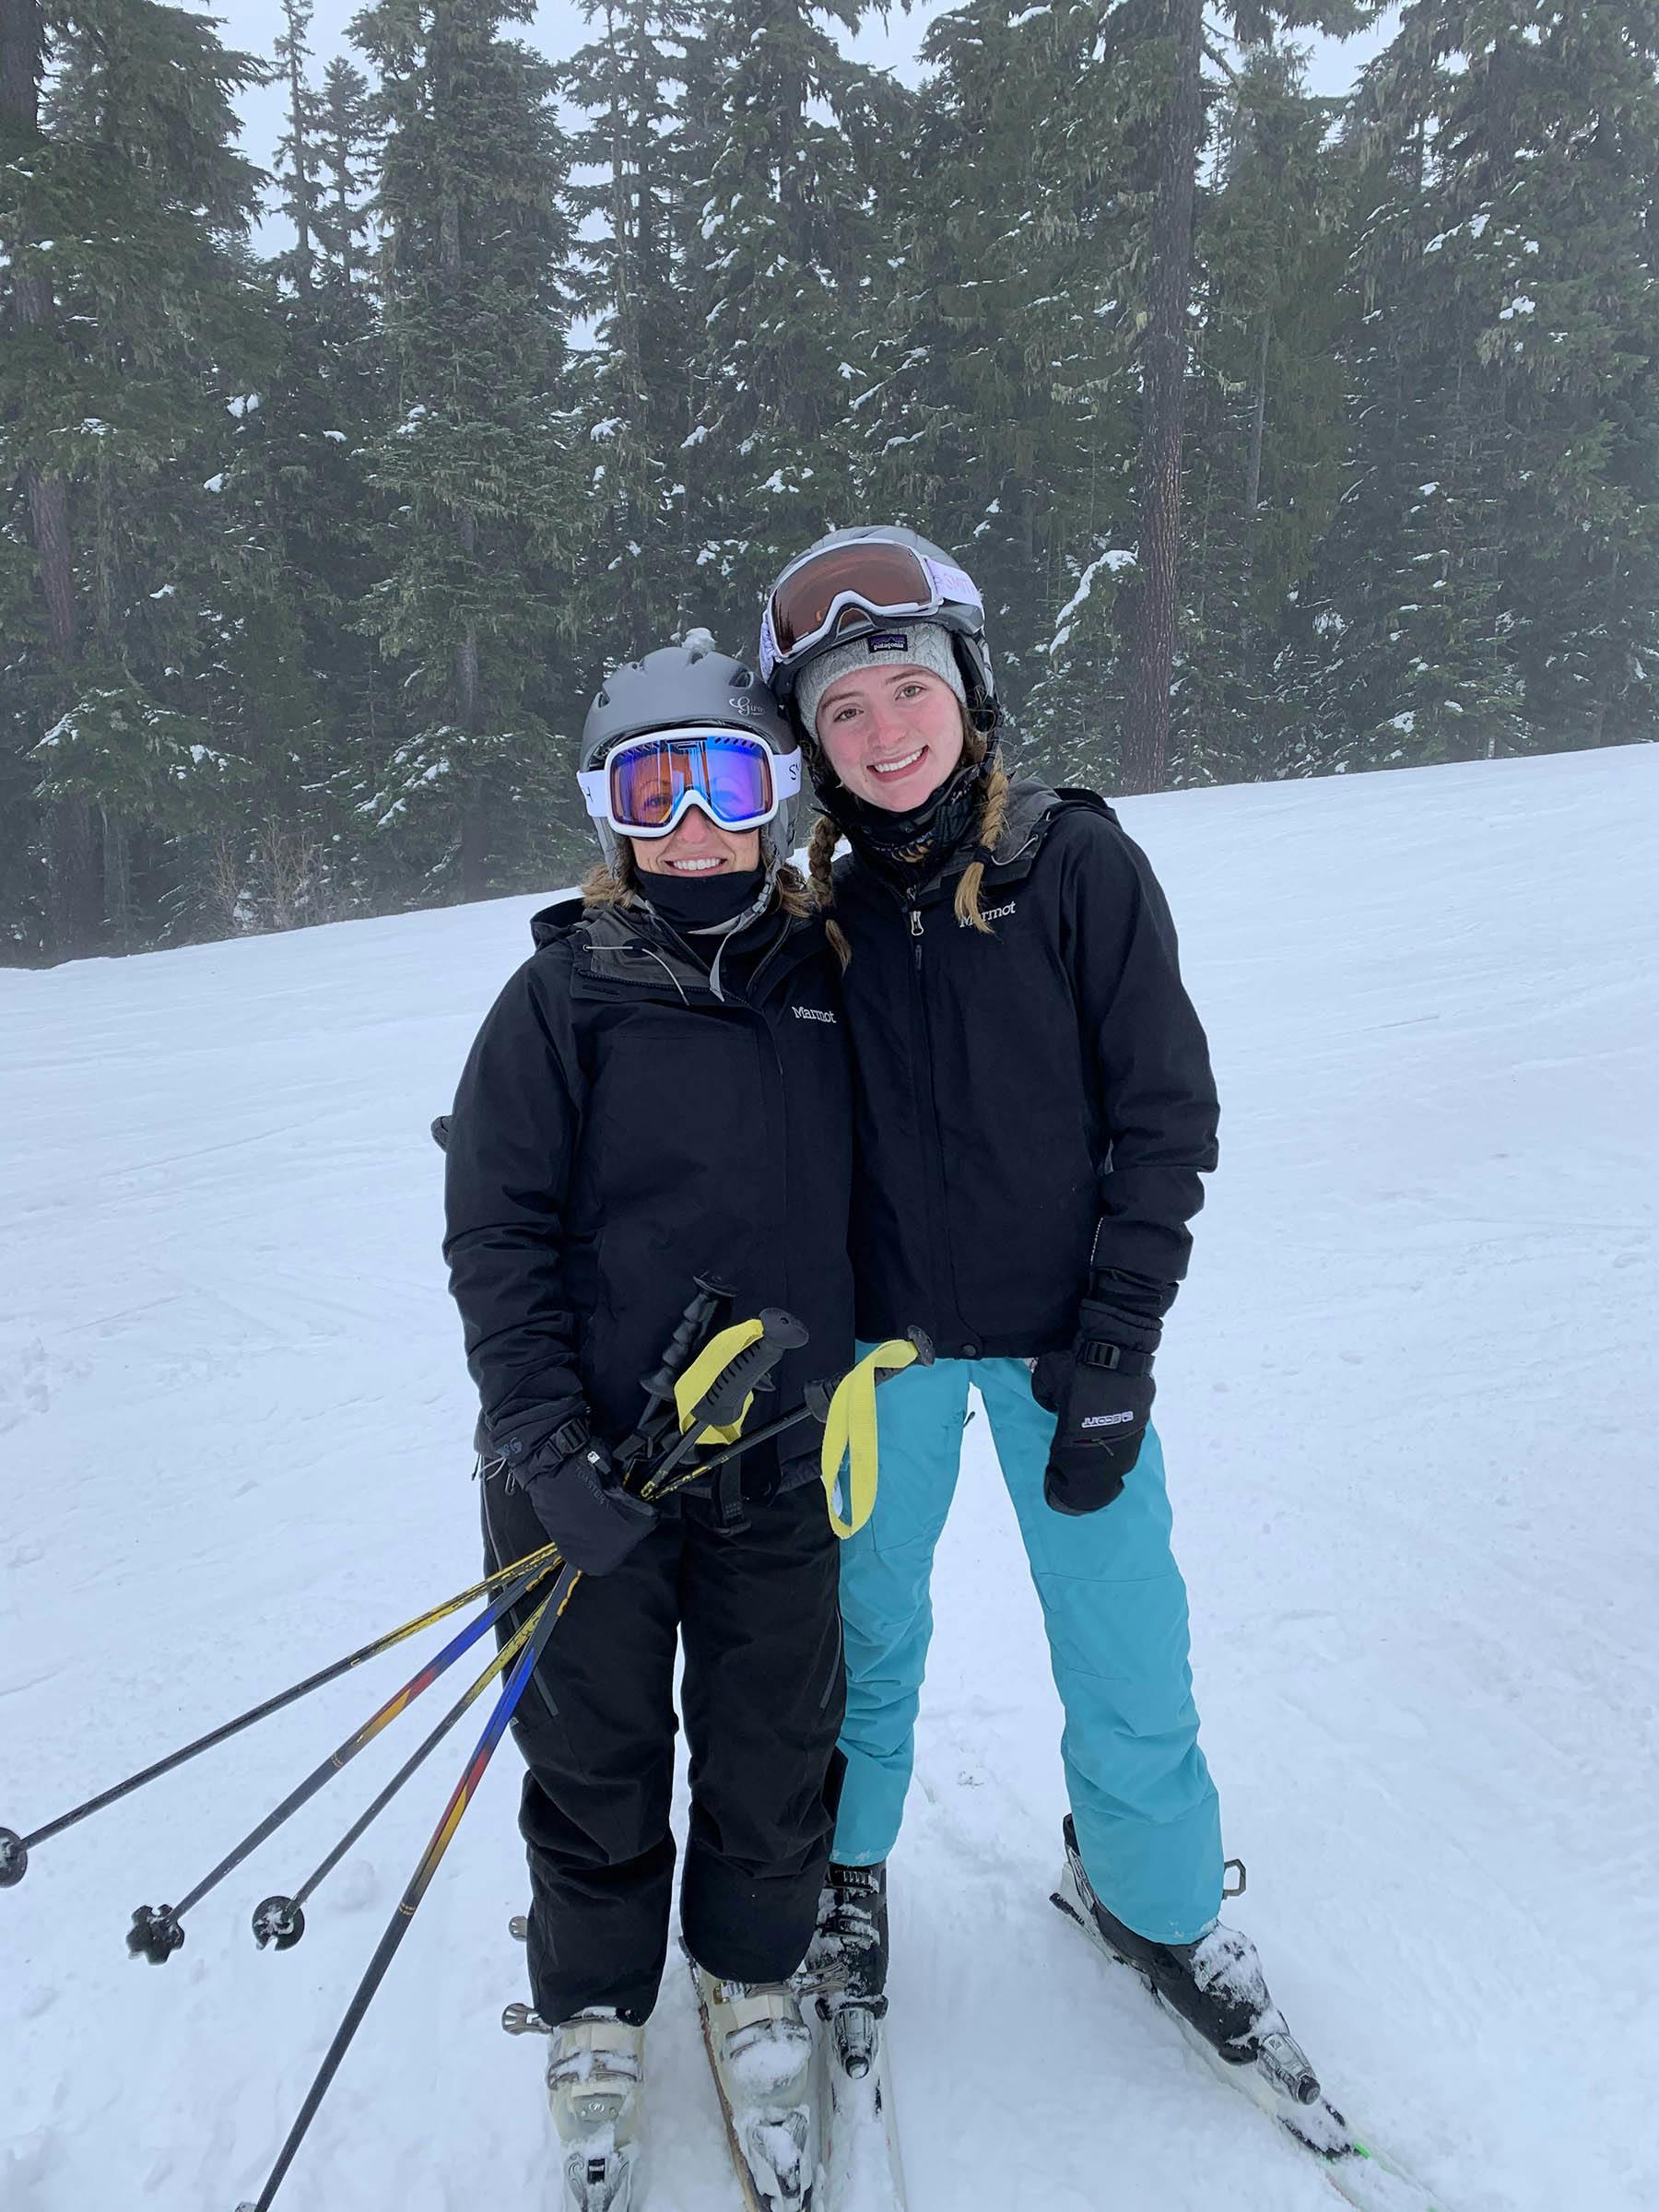 Melanie Allen and friend posing with skis